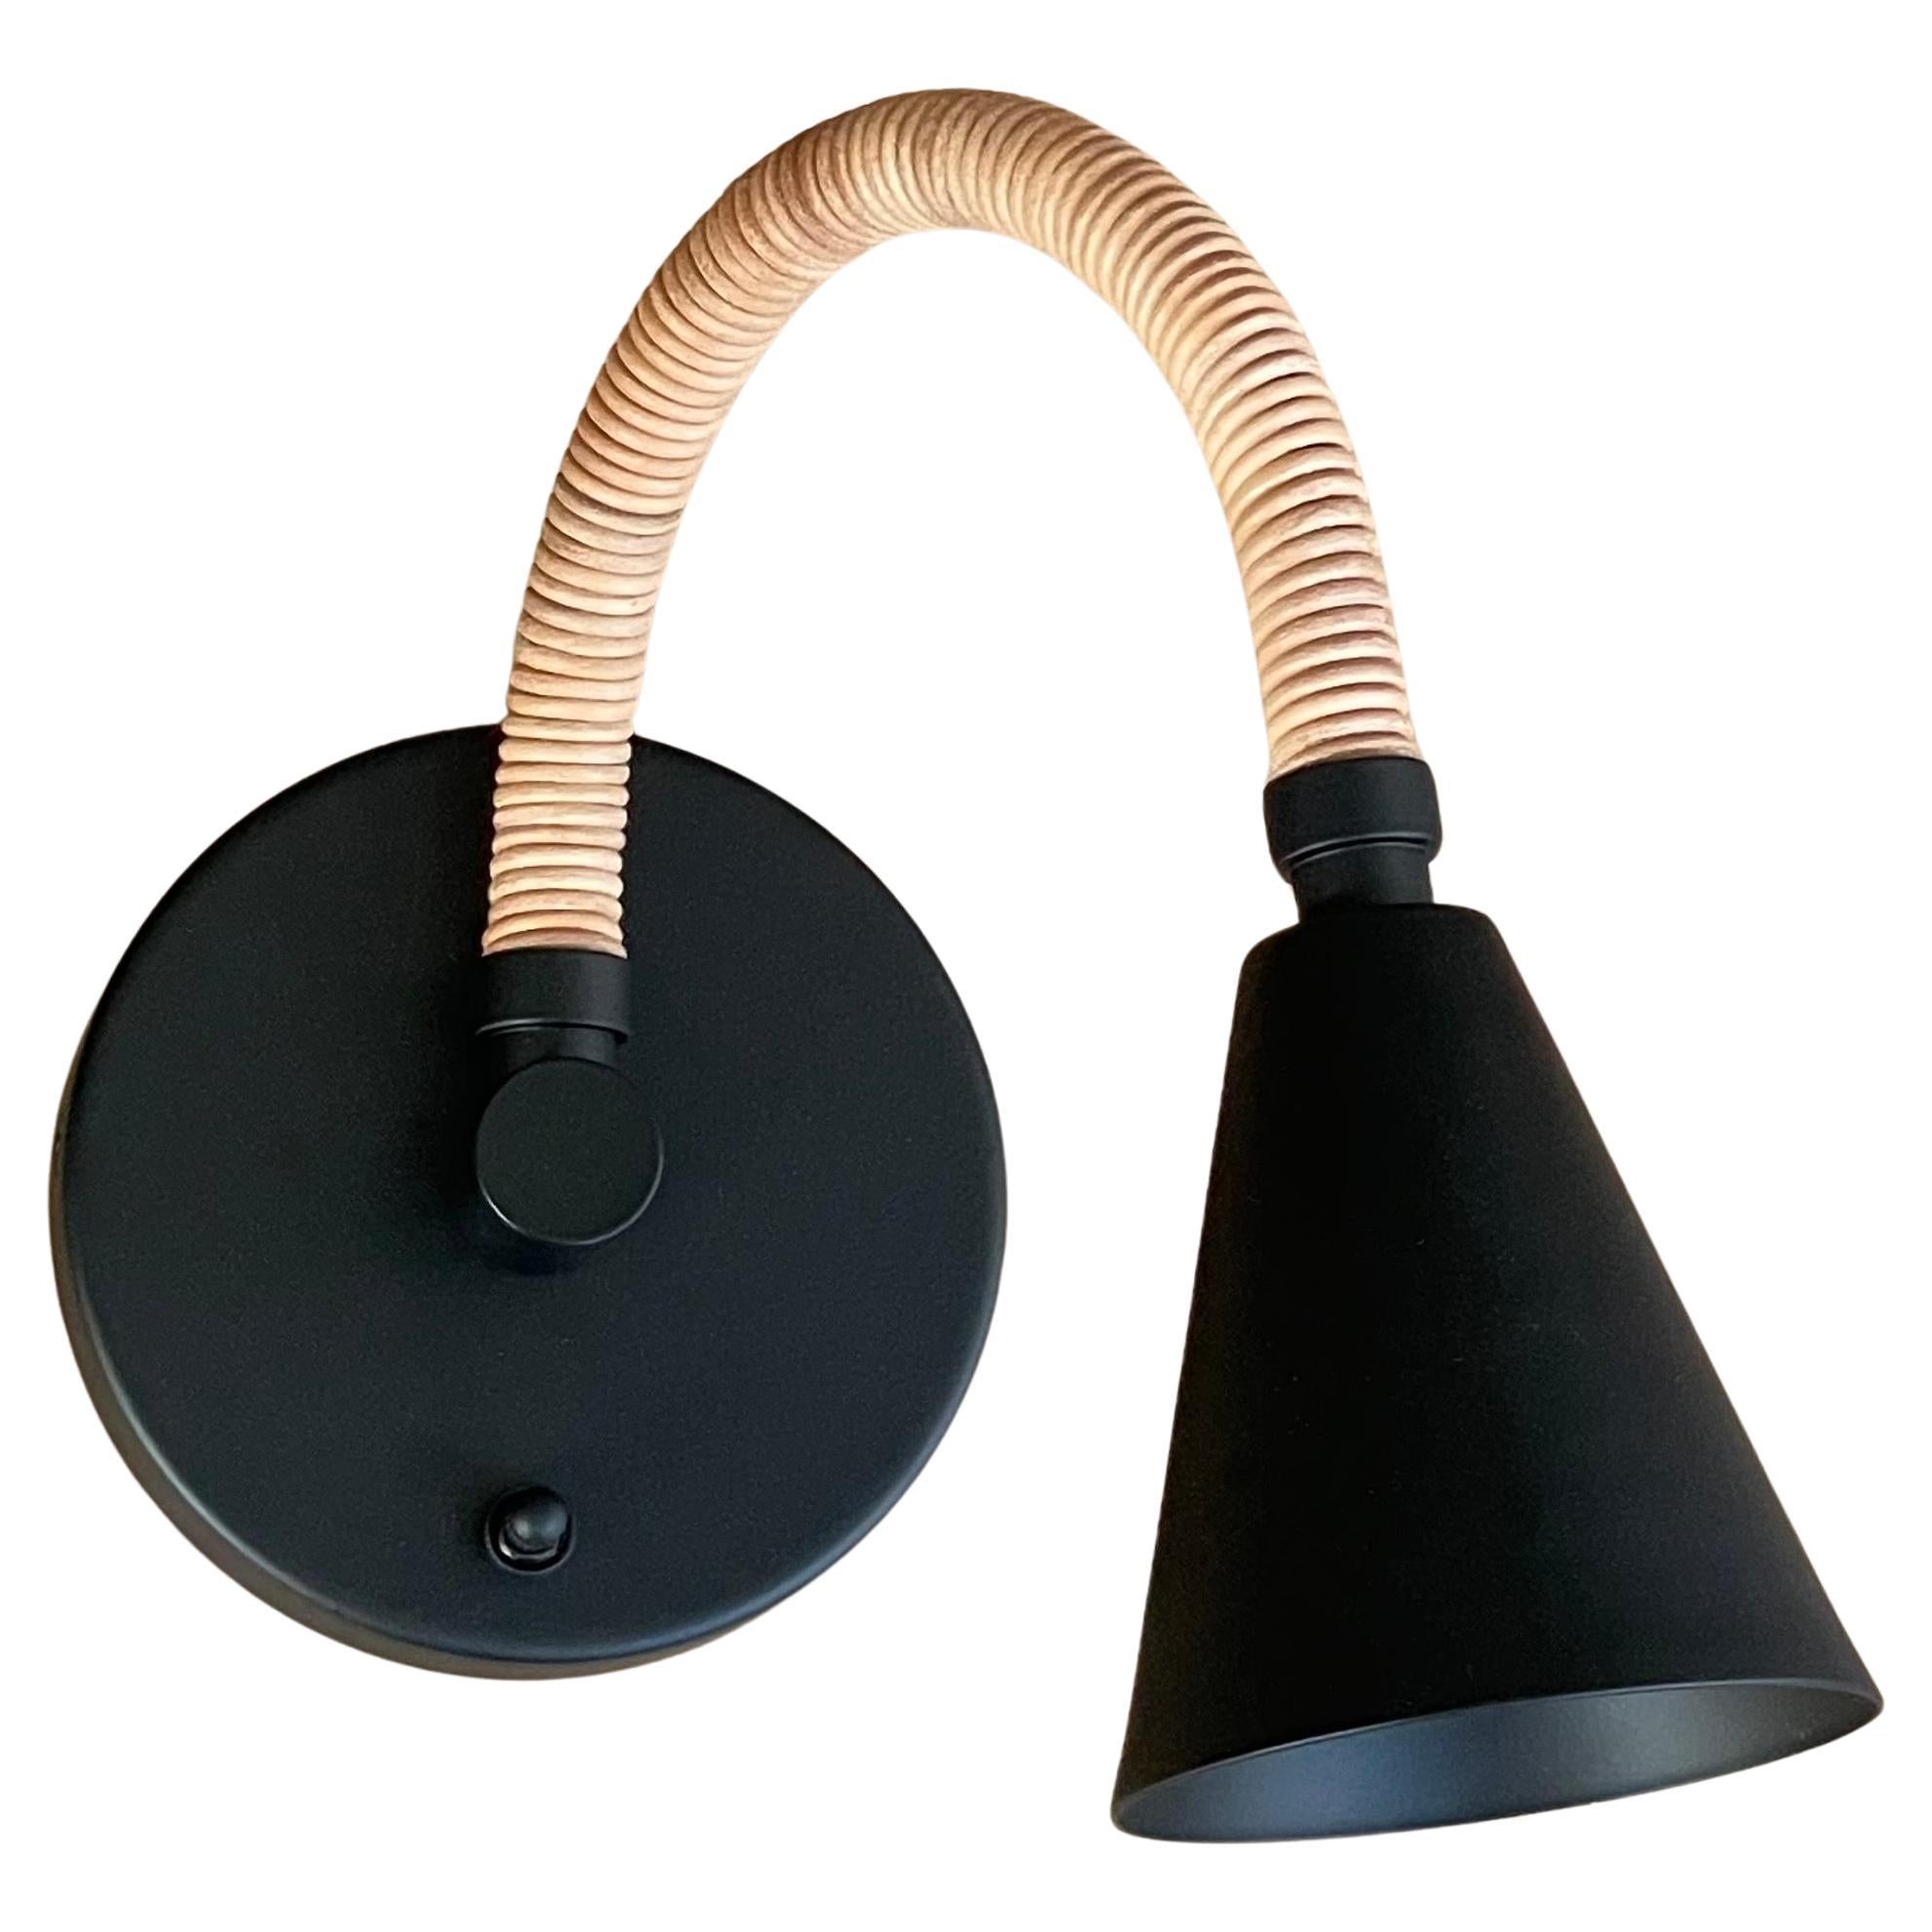 Leather wrapped flexible arm wall light you can pose and adjust as you wish. This is our updated Meander Reader light with larger cone shade and new upward angled flex arm. 
Shown here in Matte Black powder coat finish and Natural Leather.
Choose